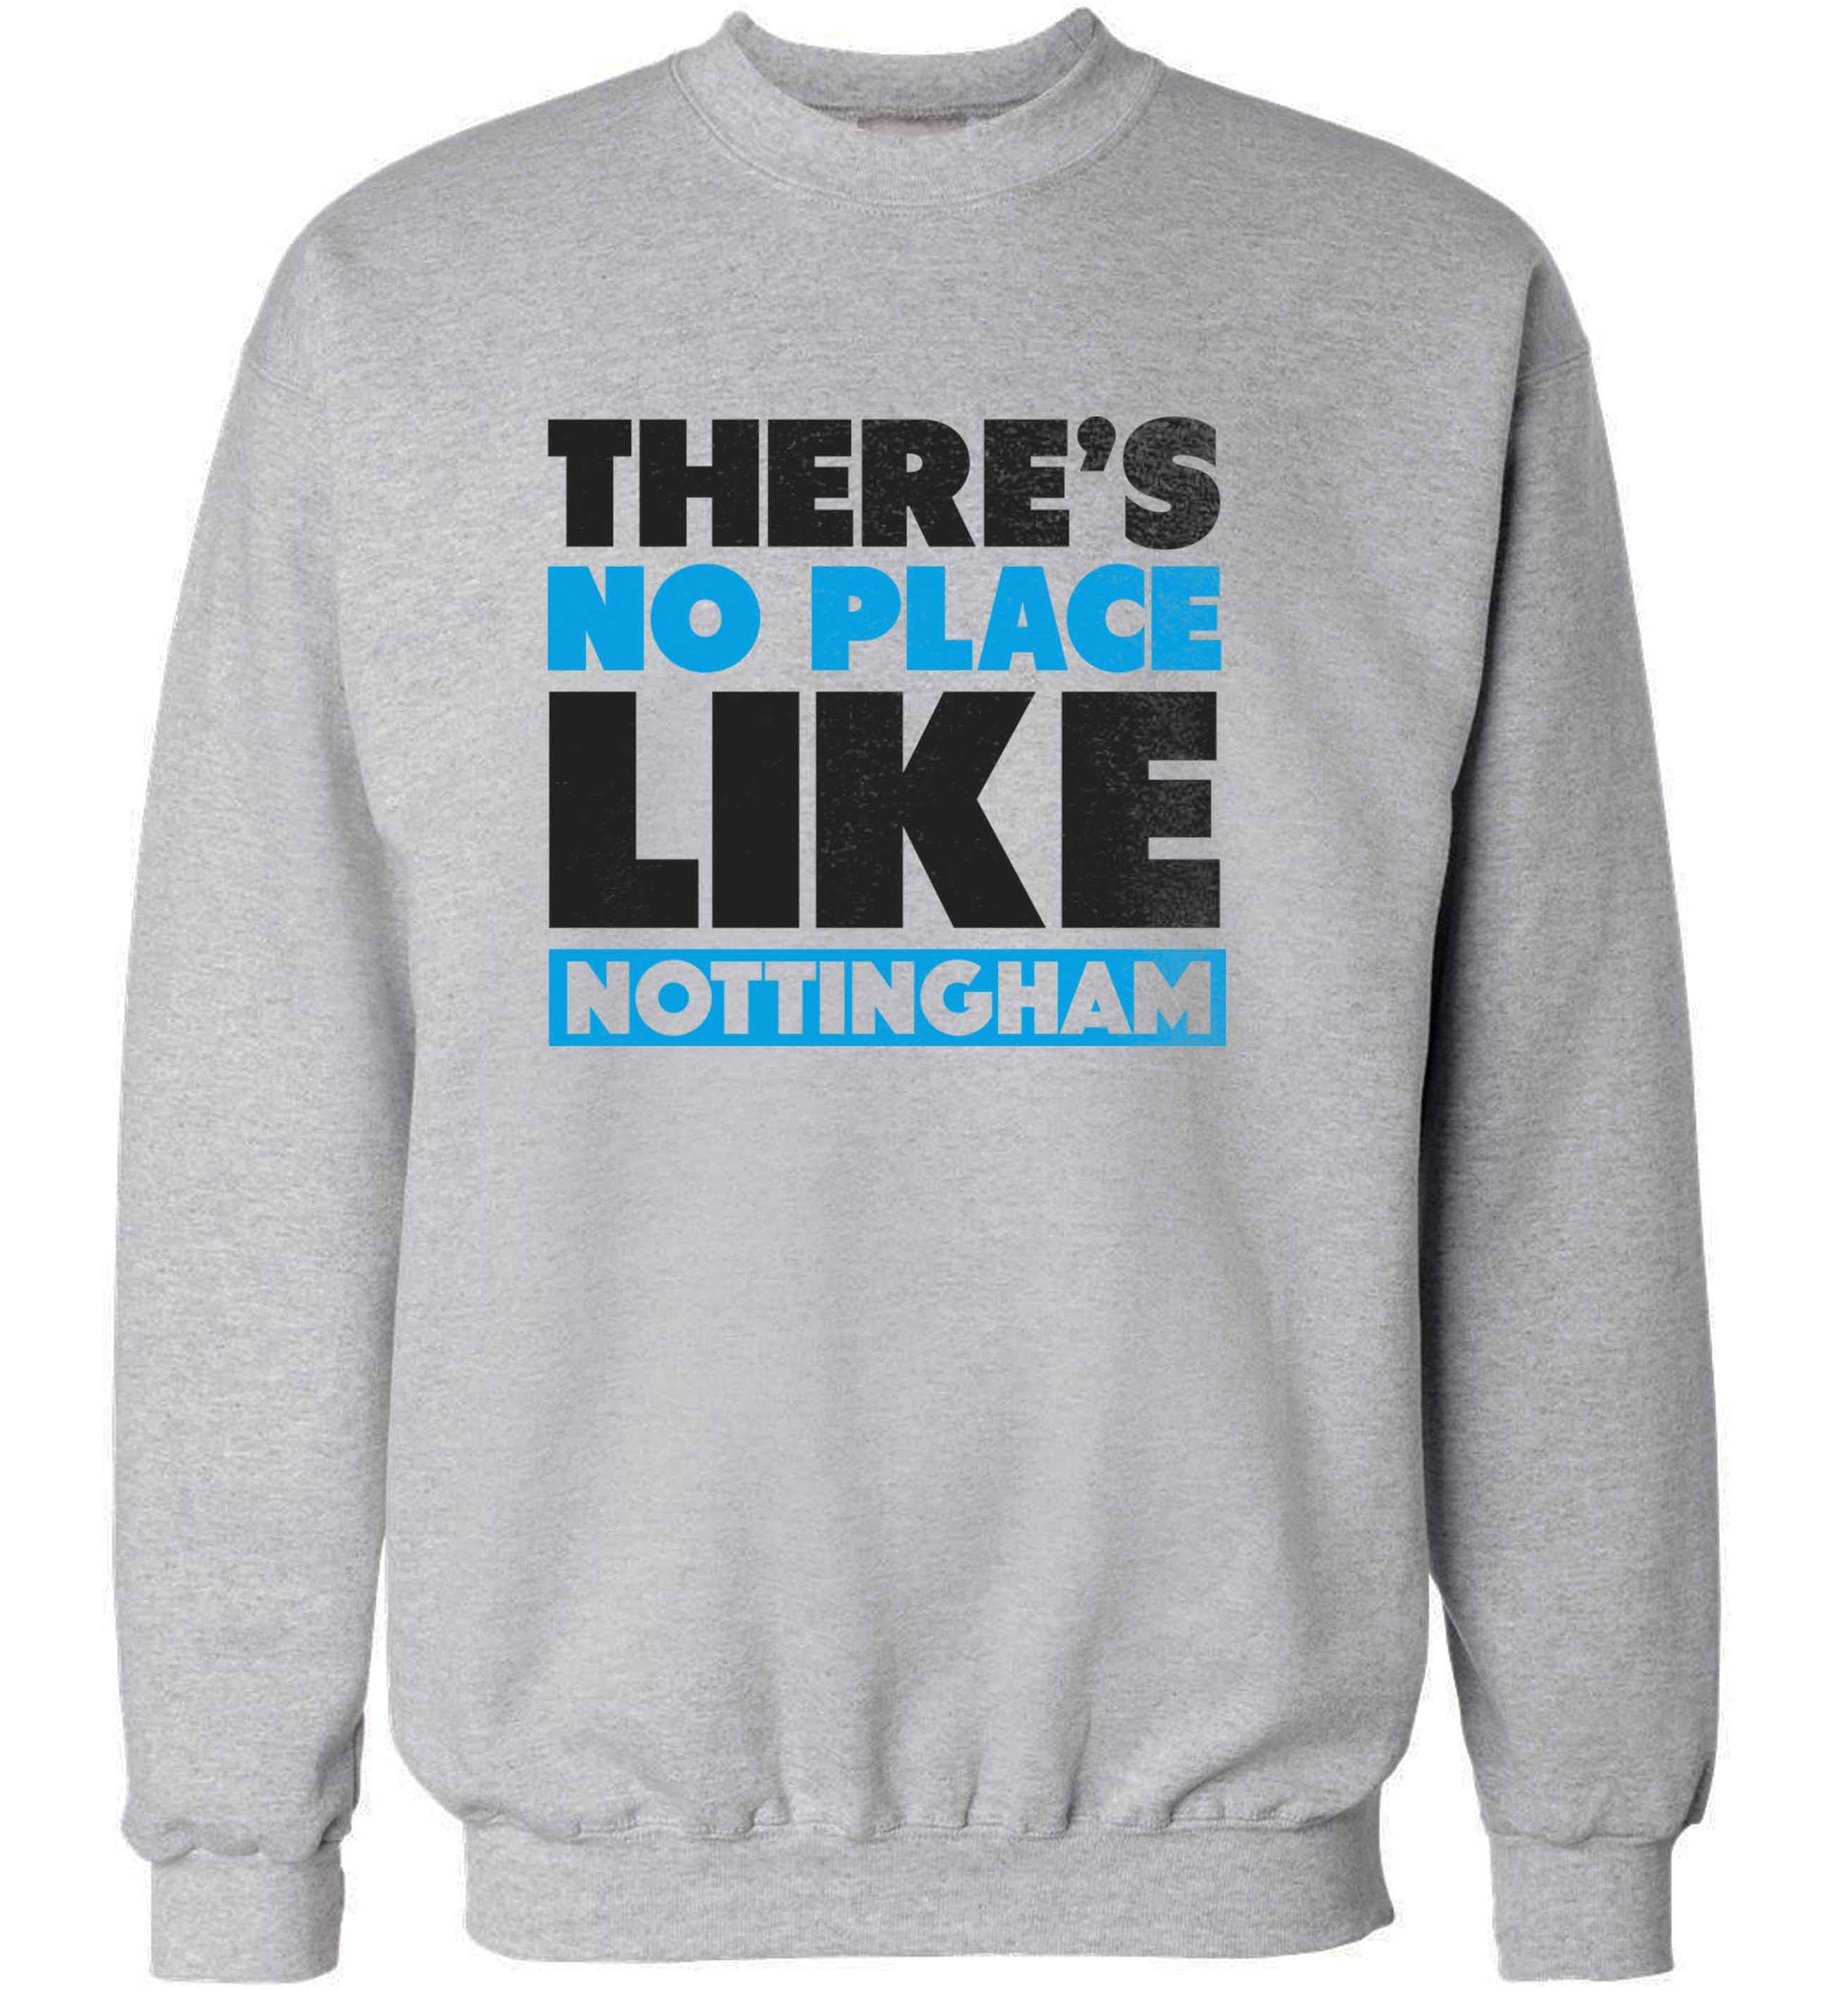 There's no place like Nottingham adult's unisex grey sweater 2XL